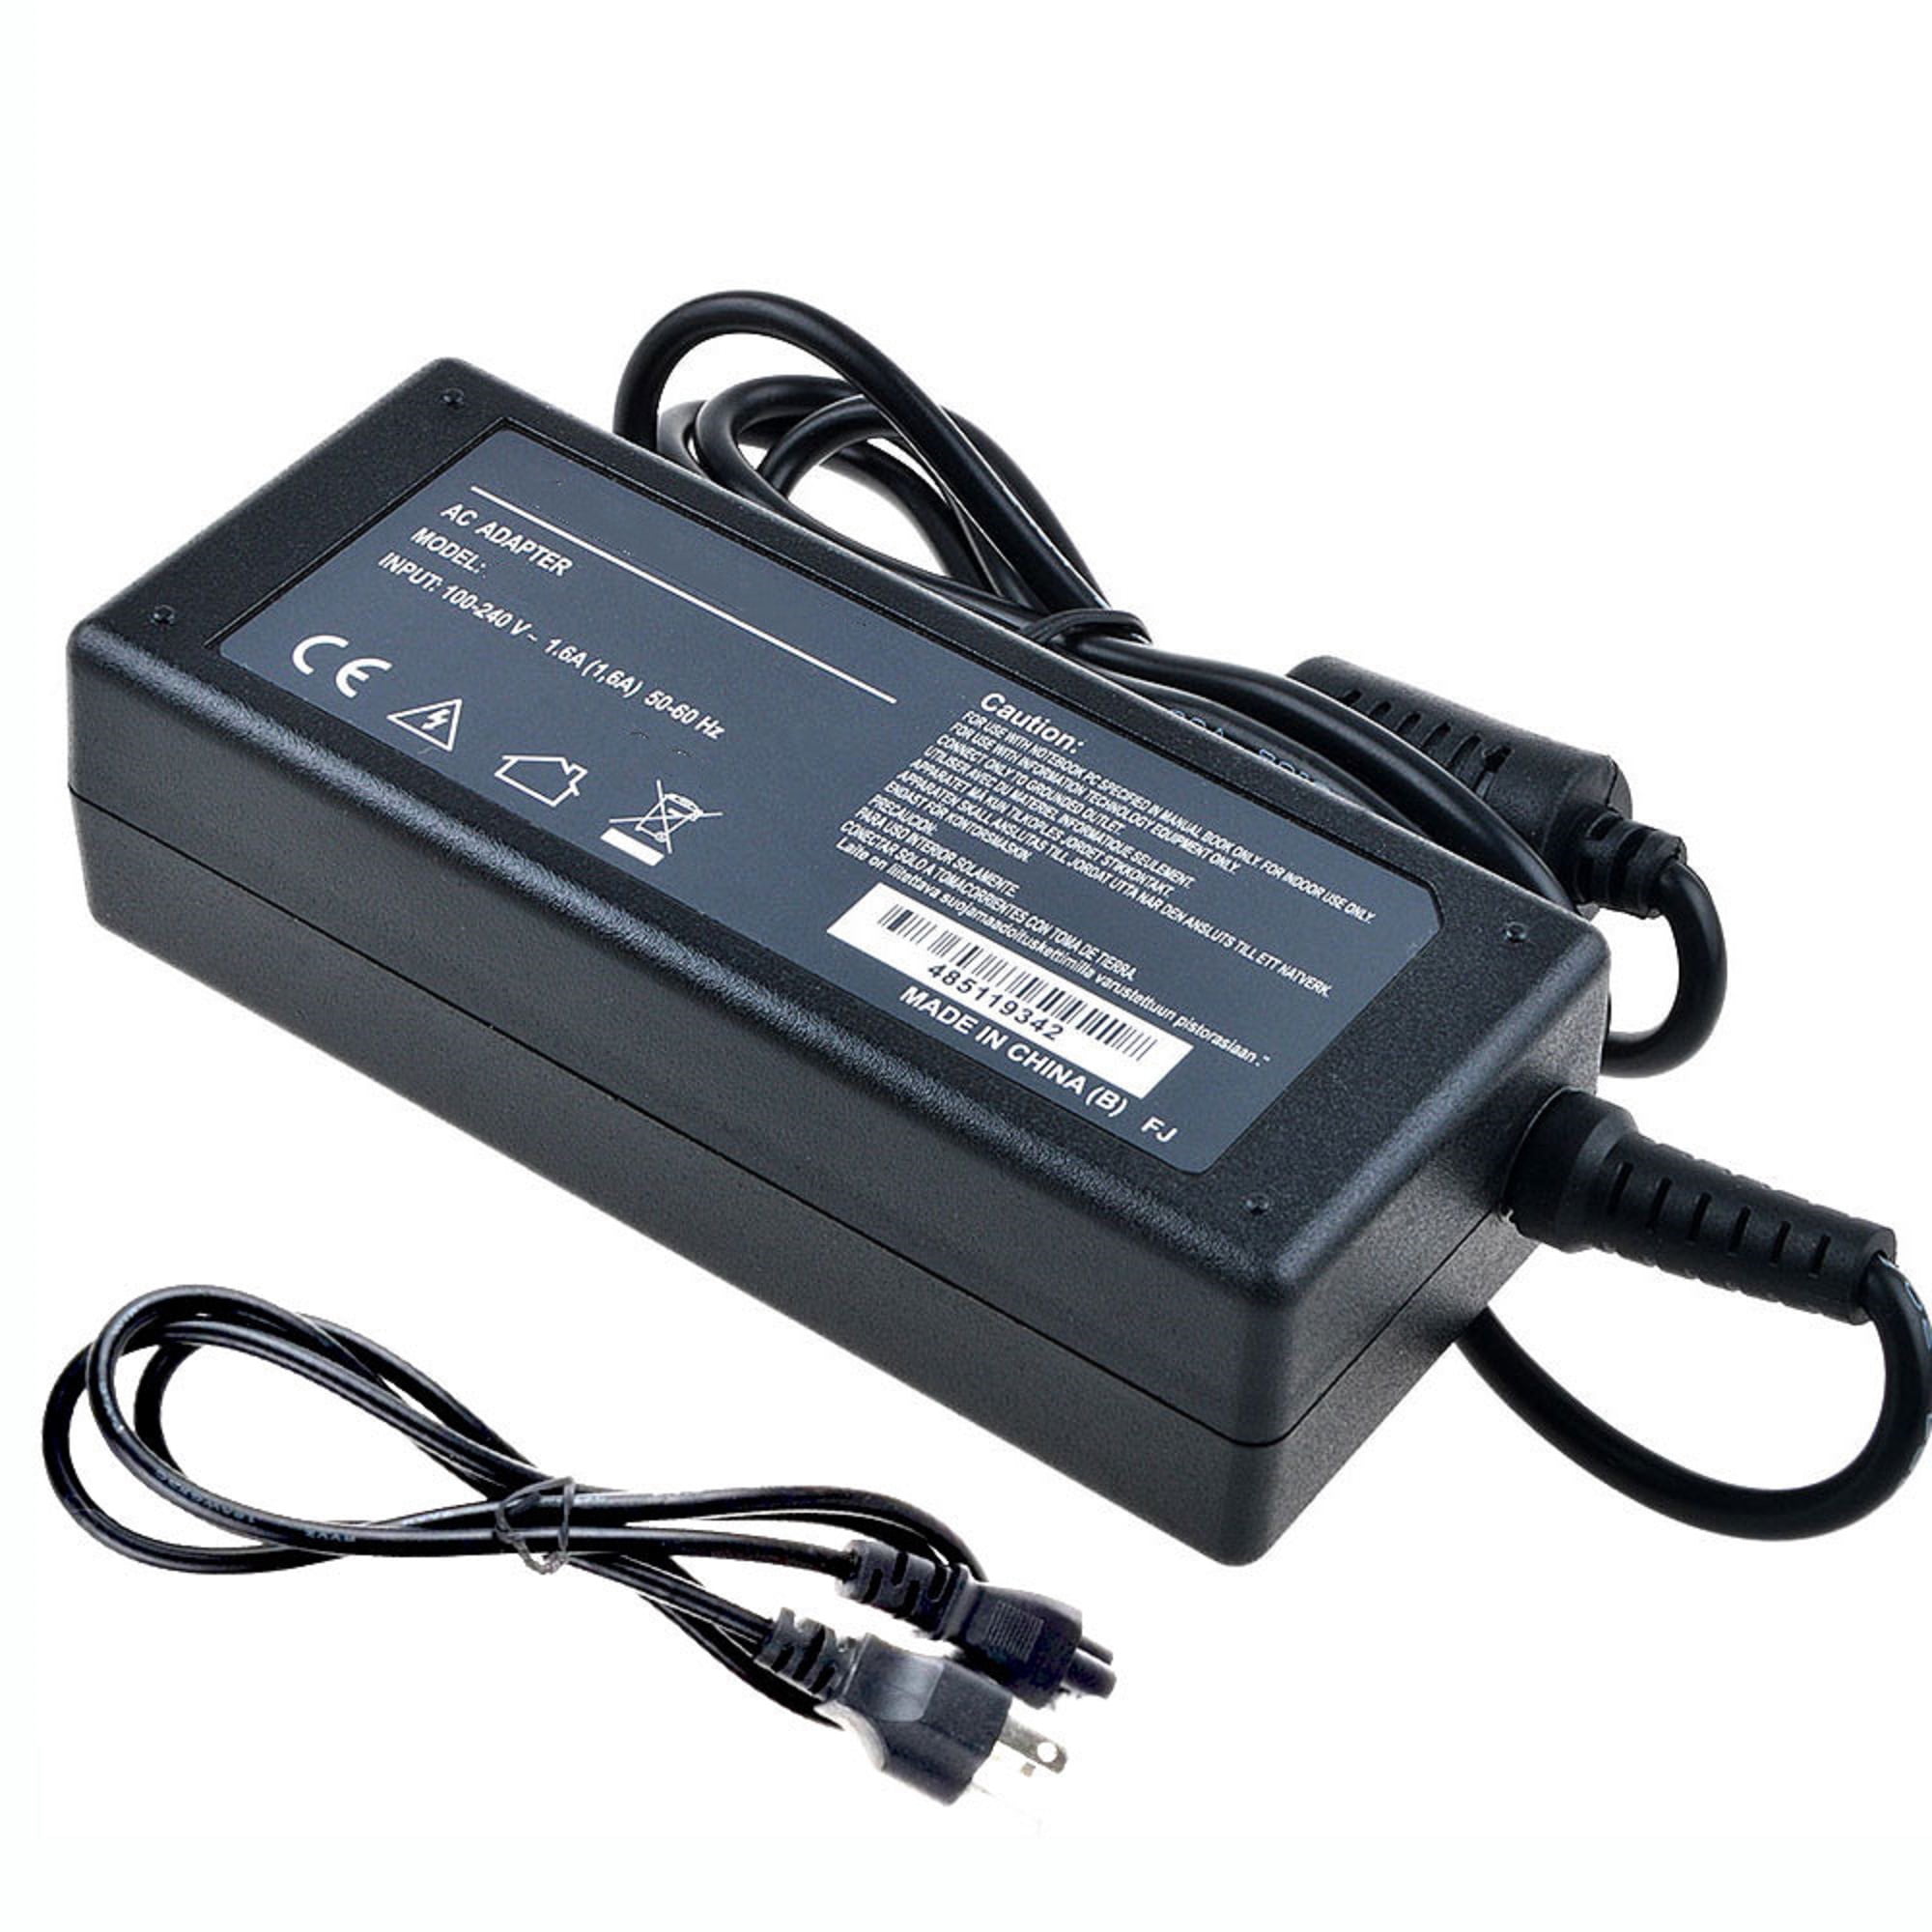 AC Adapter For Netgear A25B1-05MB PWR-023-002 5VDC Power Supply Cord Charger 